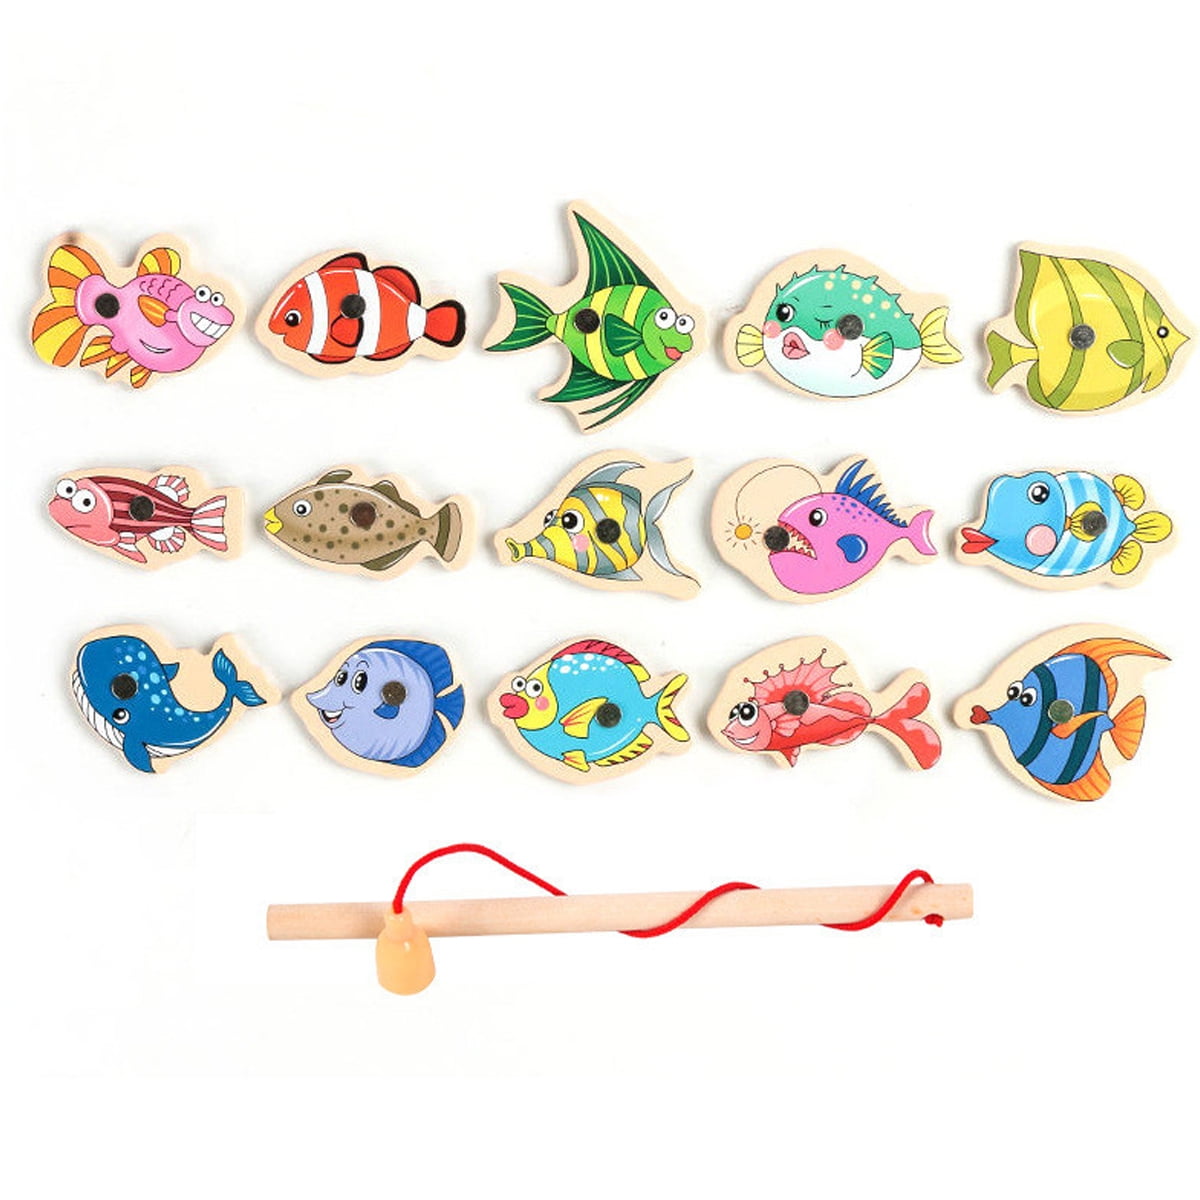 Bigjigs Toys Wooden Magnetic Fishing Game Set with Rod